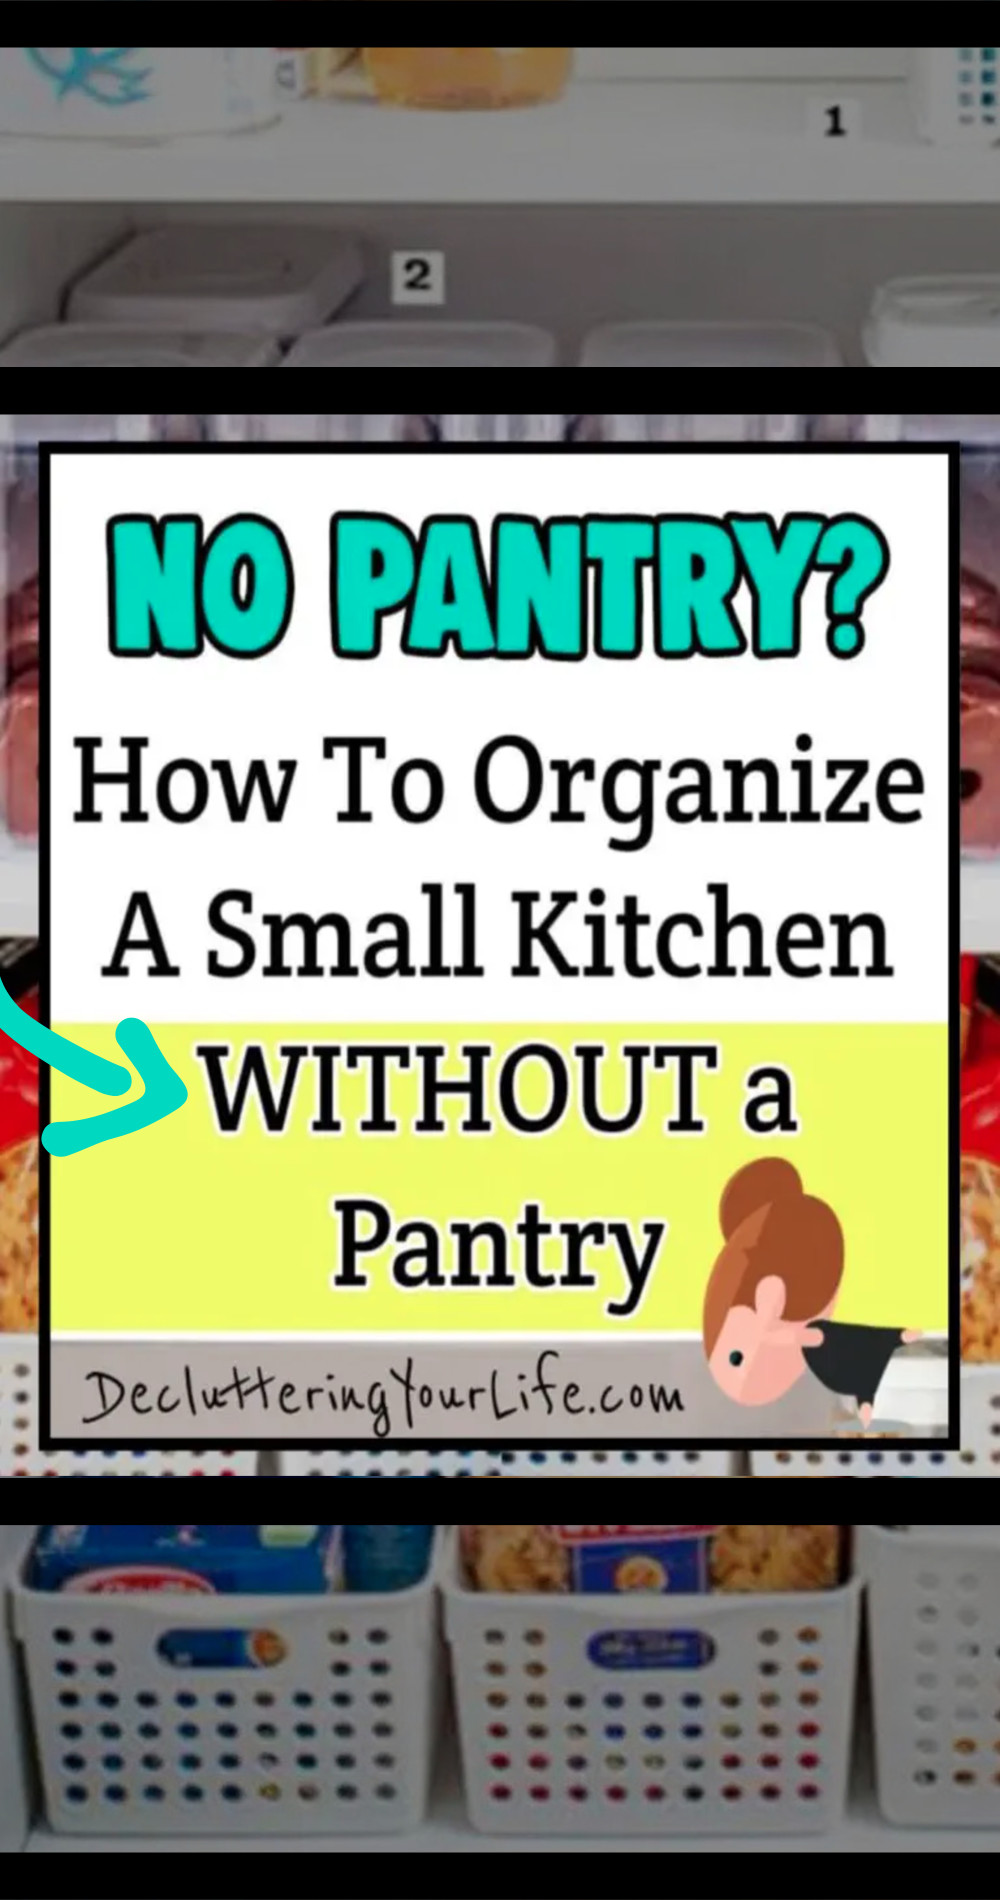 No Pantry? How To Organize A Small Kitchen WITHOUT A Pantry